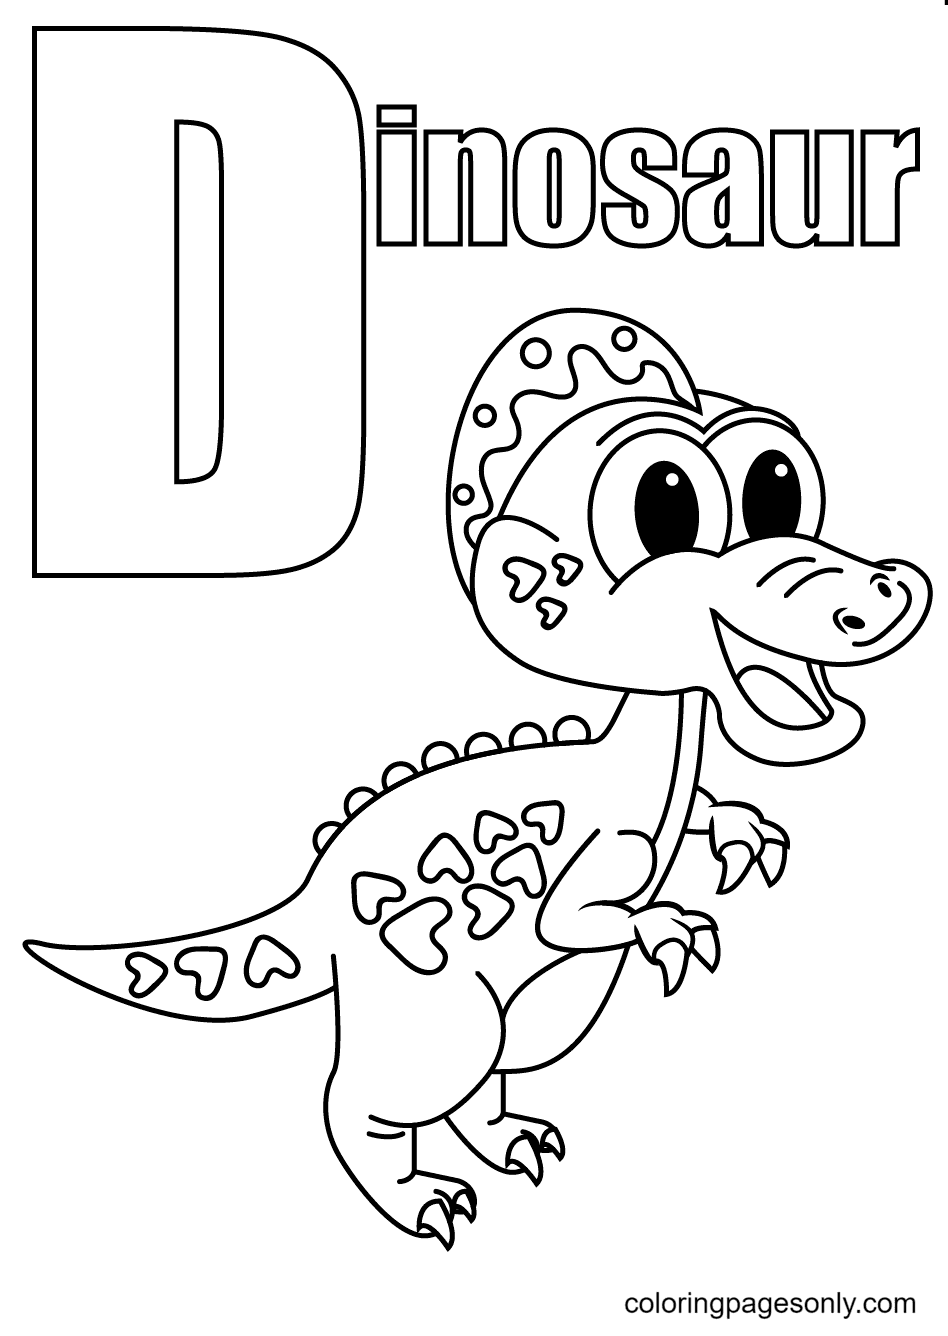 A Cute and Happy Dinosaur for the Letter D Coloring Page